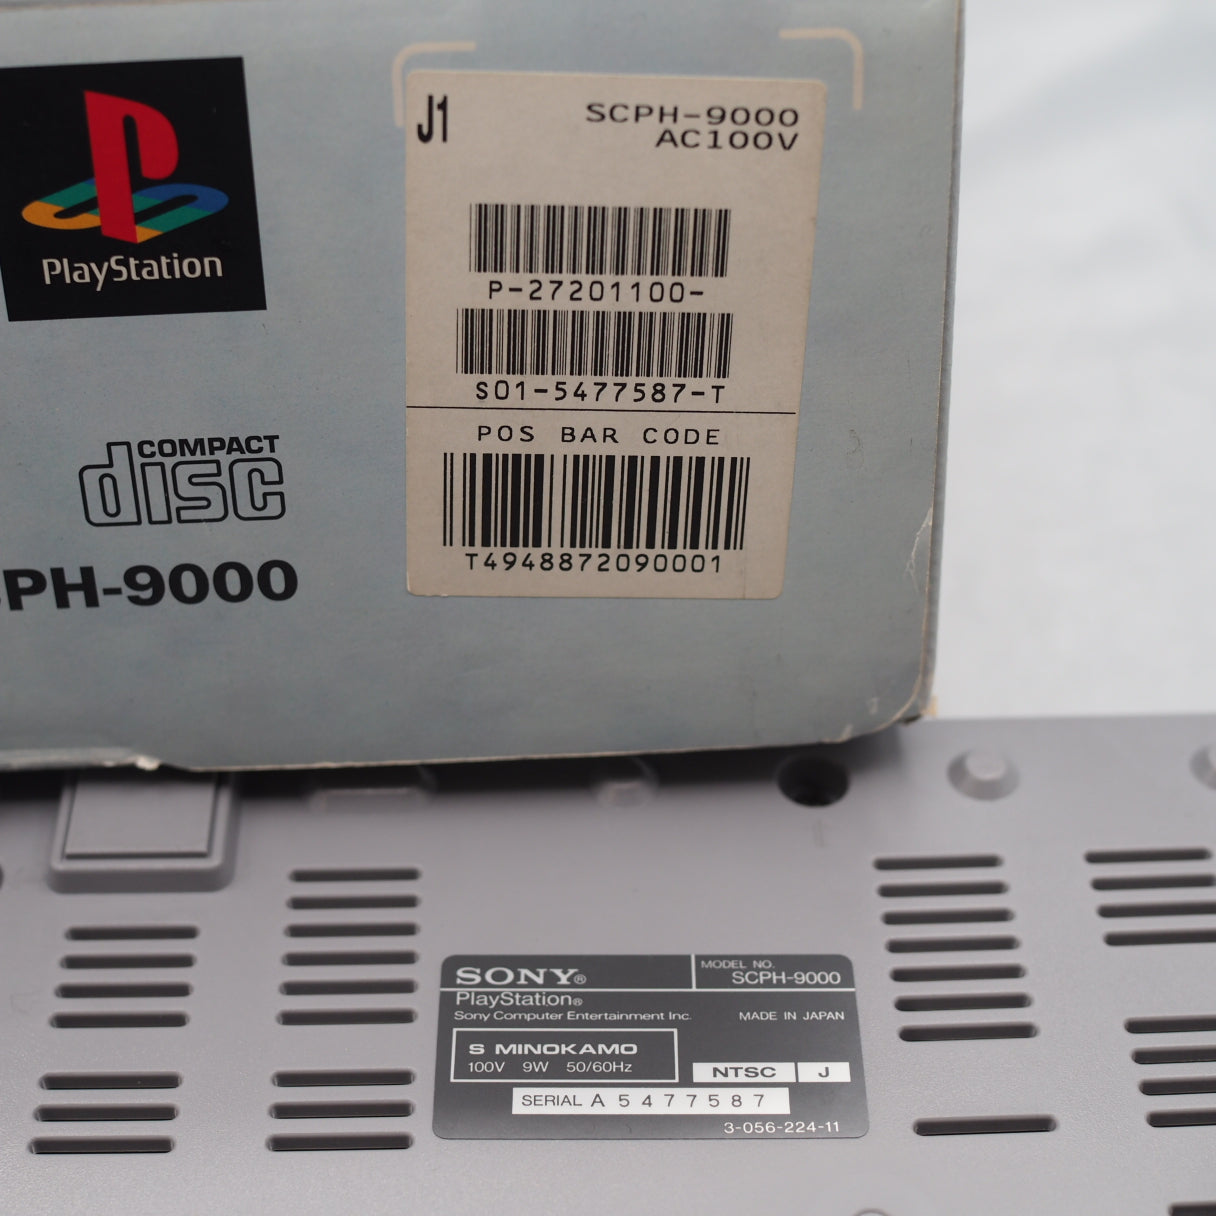 PS1 Console SCPH-7000 [Serial number match]